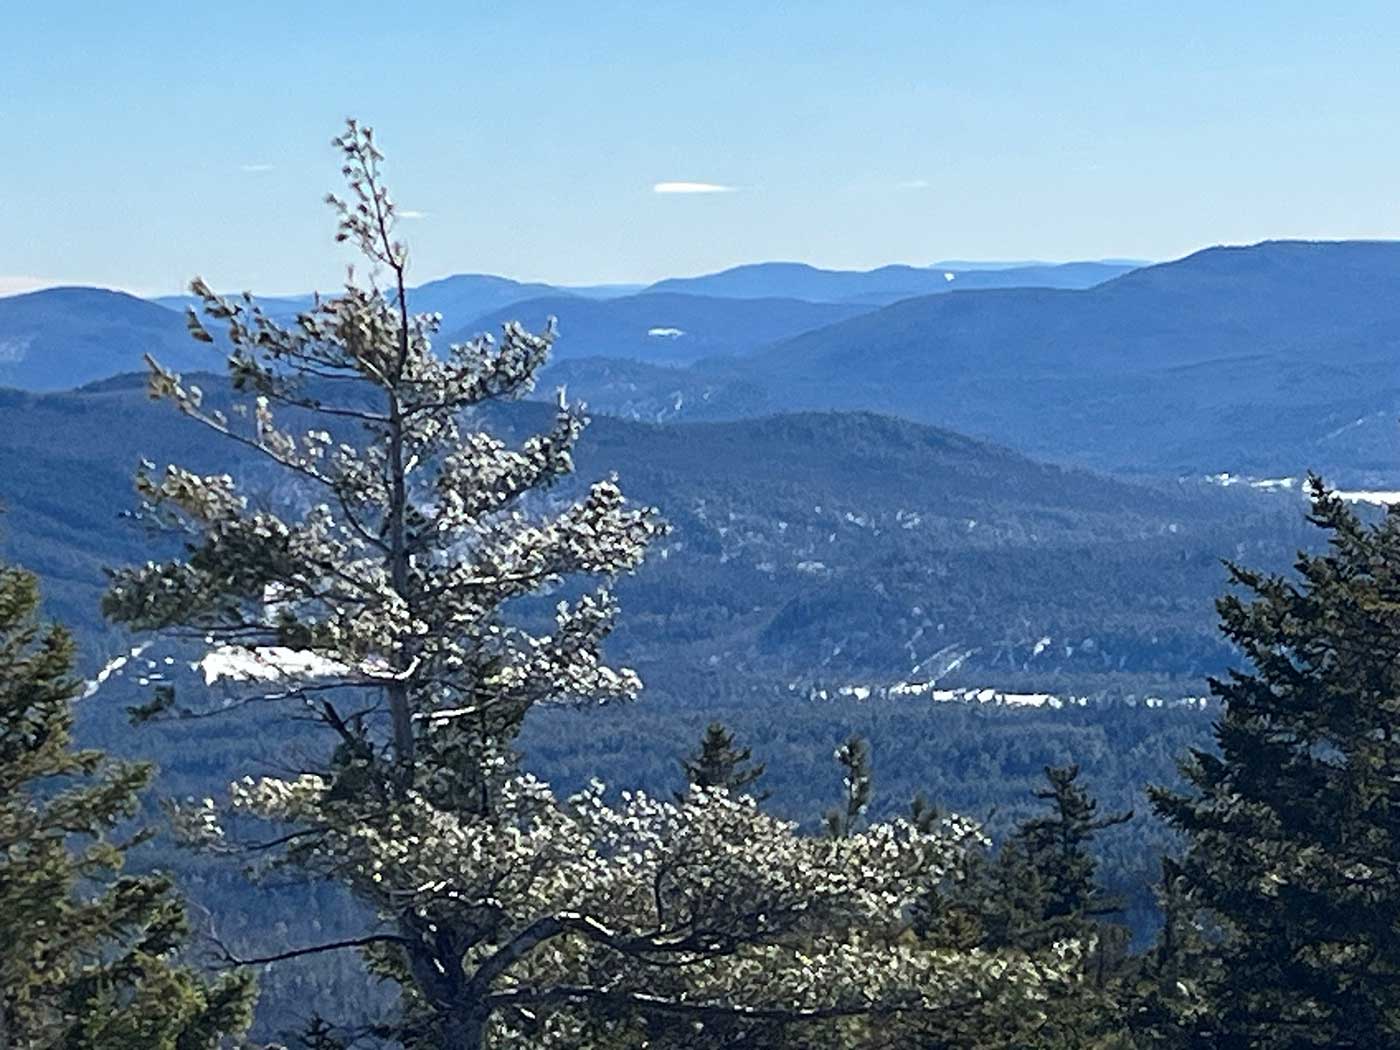 View of tree and mountains from top of mountain